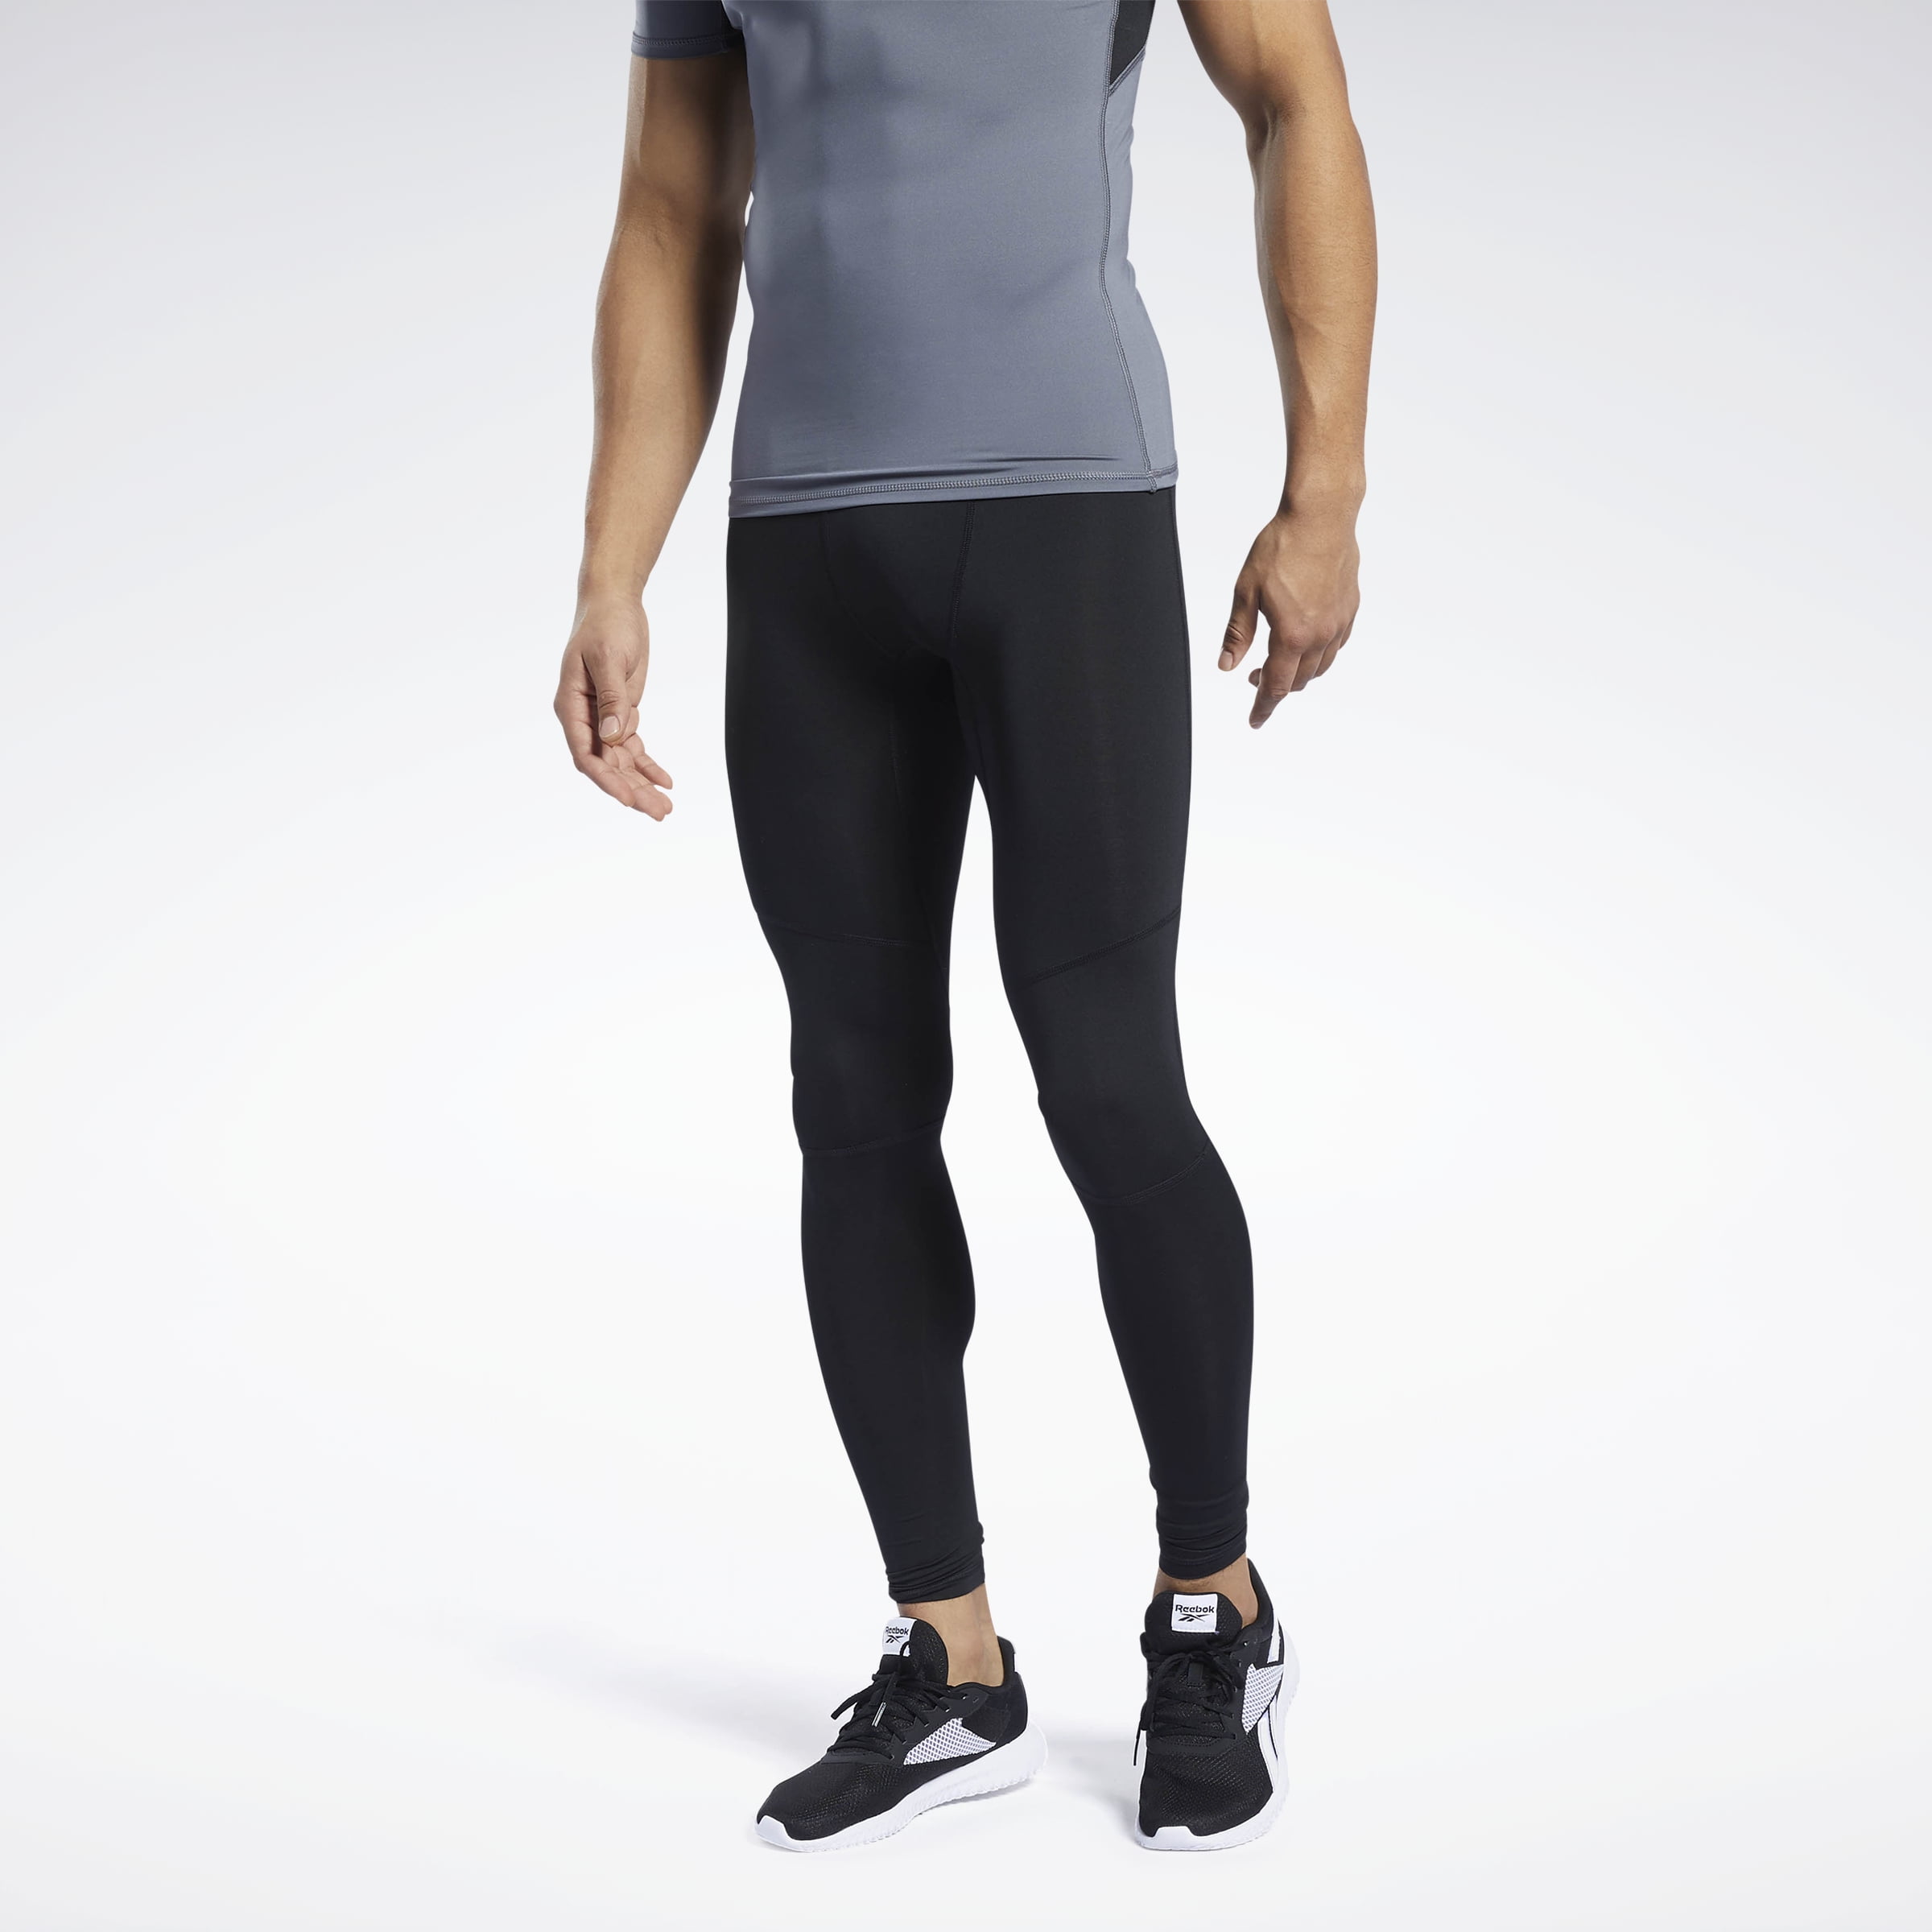 Reebok Men's Workout Ready Compression Tights 